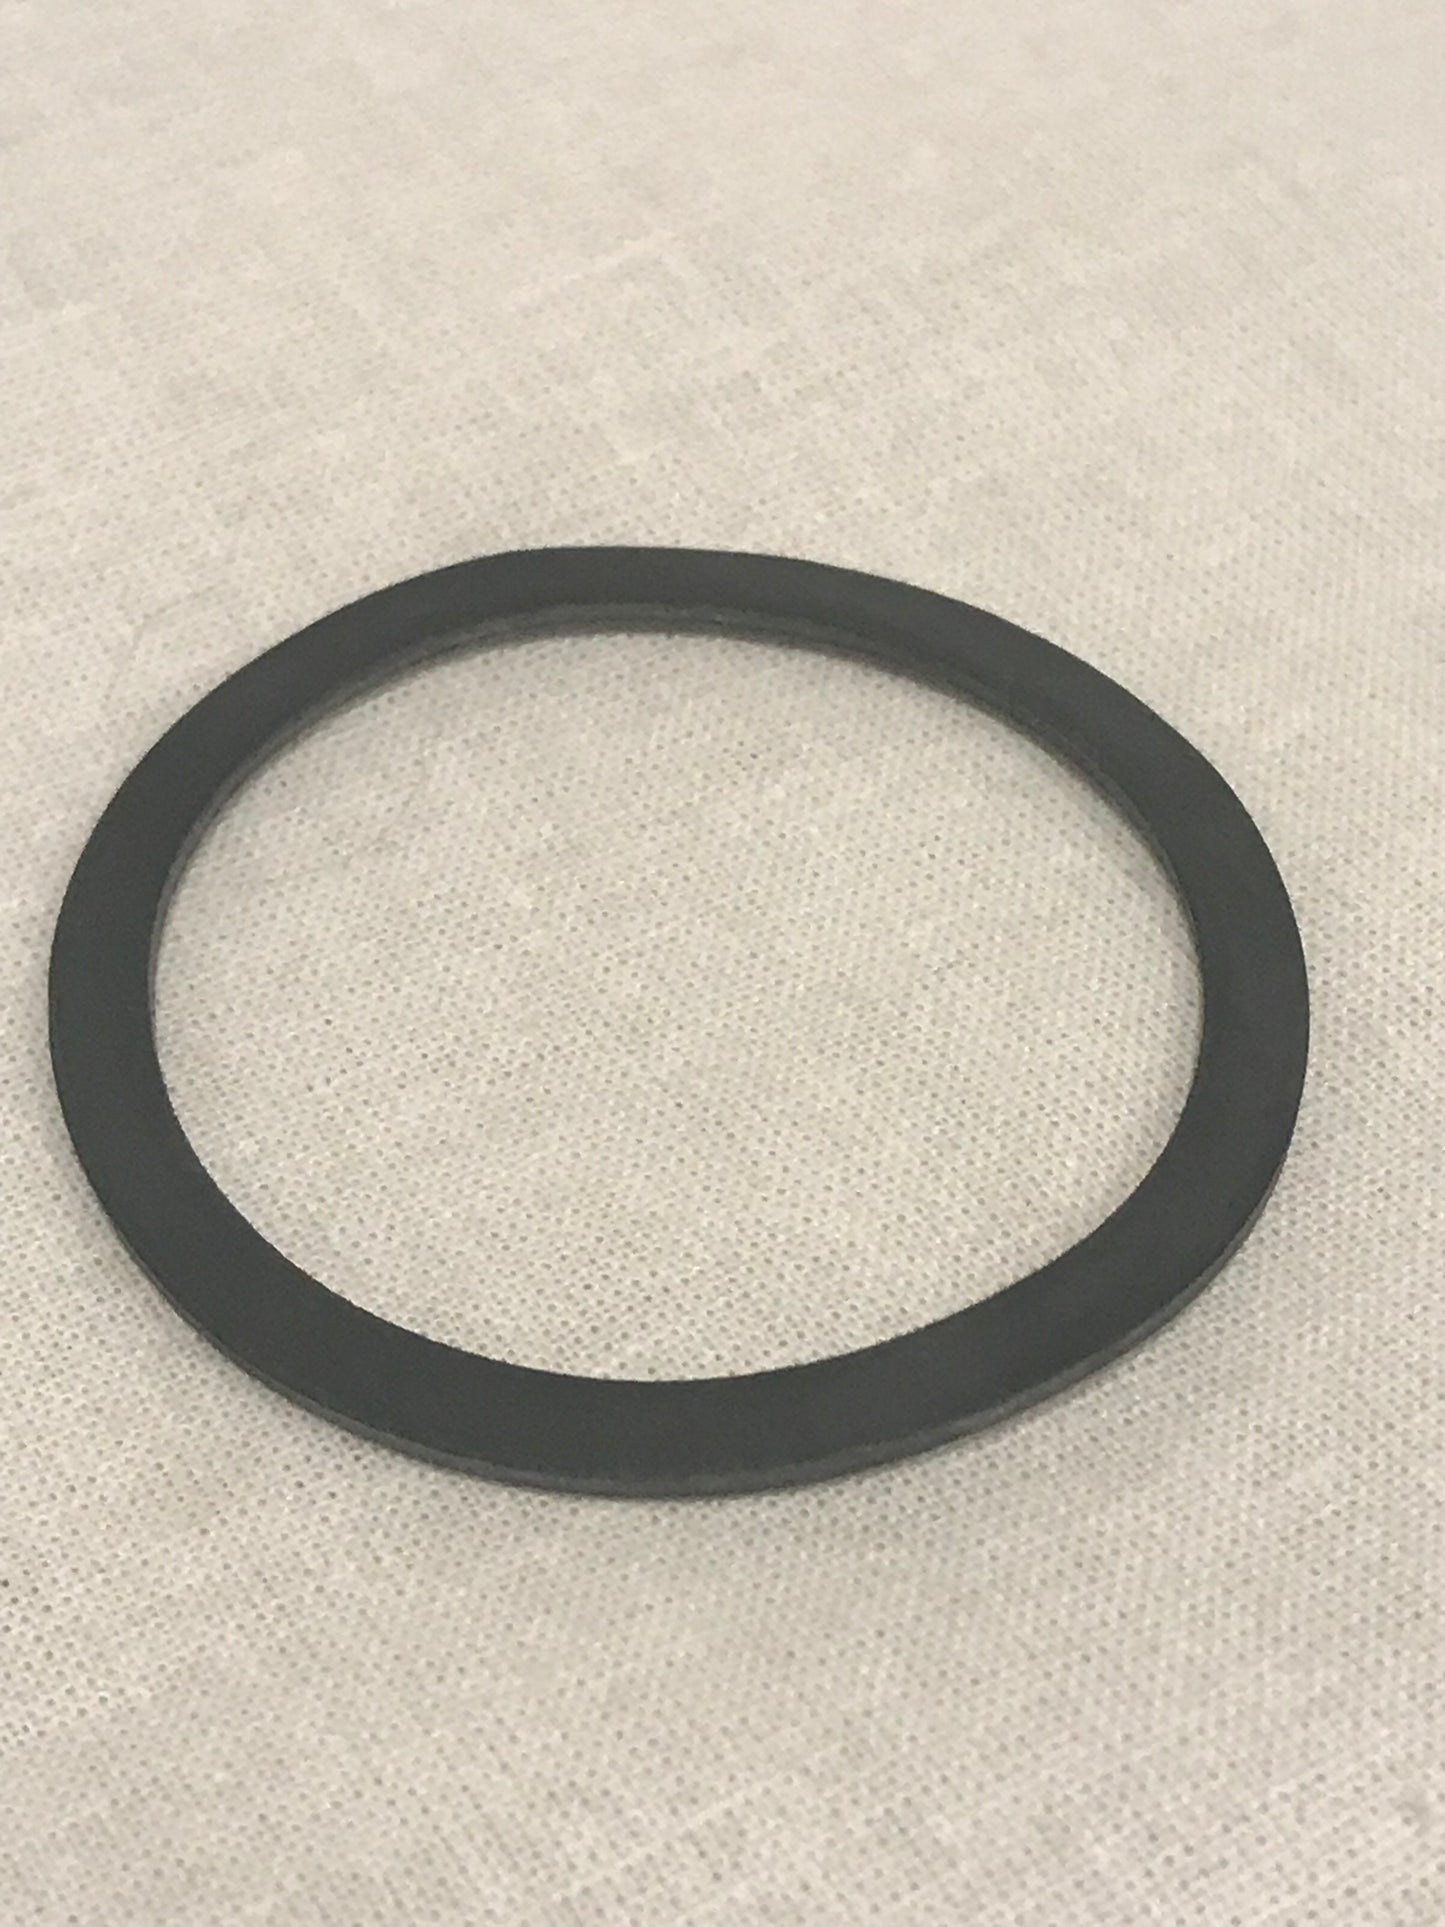 Columbia Large Floating Reproducer Diaphragm Gasket